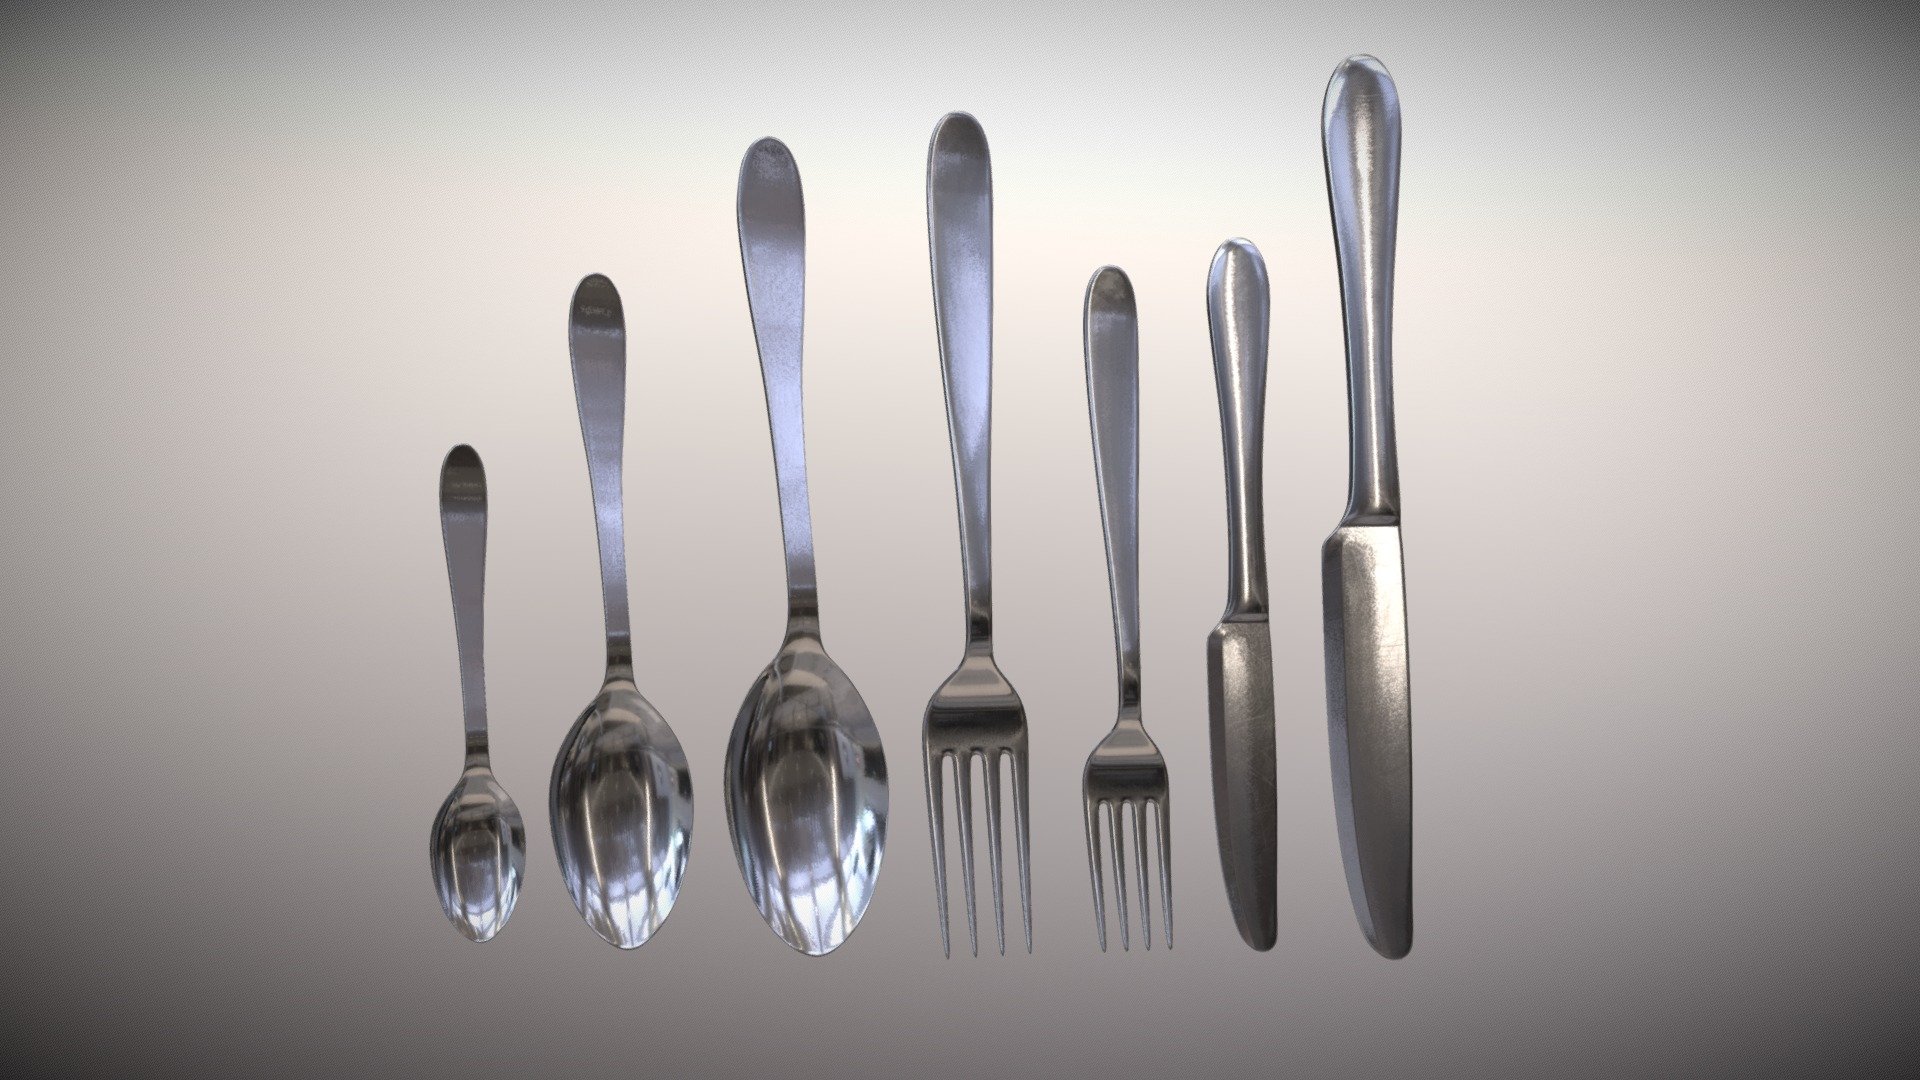 Check cutlery collection: https://skfb.ly/oBpuZ

[Zip File - Separated files]

Collection Information:




Objects: dessert fork, dinner fork, dessert knife, dinner knife, teaspoon, dessert spoon, soup spoon

Mesh Information:




Subdivision-ready model

Fork Subdivision 0: 572 faces, 1144 tris

Knife Subdivision 0: 480 faces, 960 tris

Spoon Subdivision 0: 548 faces, 1096 tris

UV unwrapped

Texture Information:




Texture size: 1024x1024, 2048x2048

BaseColor

Metallic

Roughness

Normal OpenGL and DirectX

PNG format

Formats include: 




.obj

.fbx

.blend

Render: Blender 3.3.1 Cycles

HDRI from: polyhaven.com

~ If you have questions or problems, please feel free to contact me 3d model